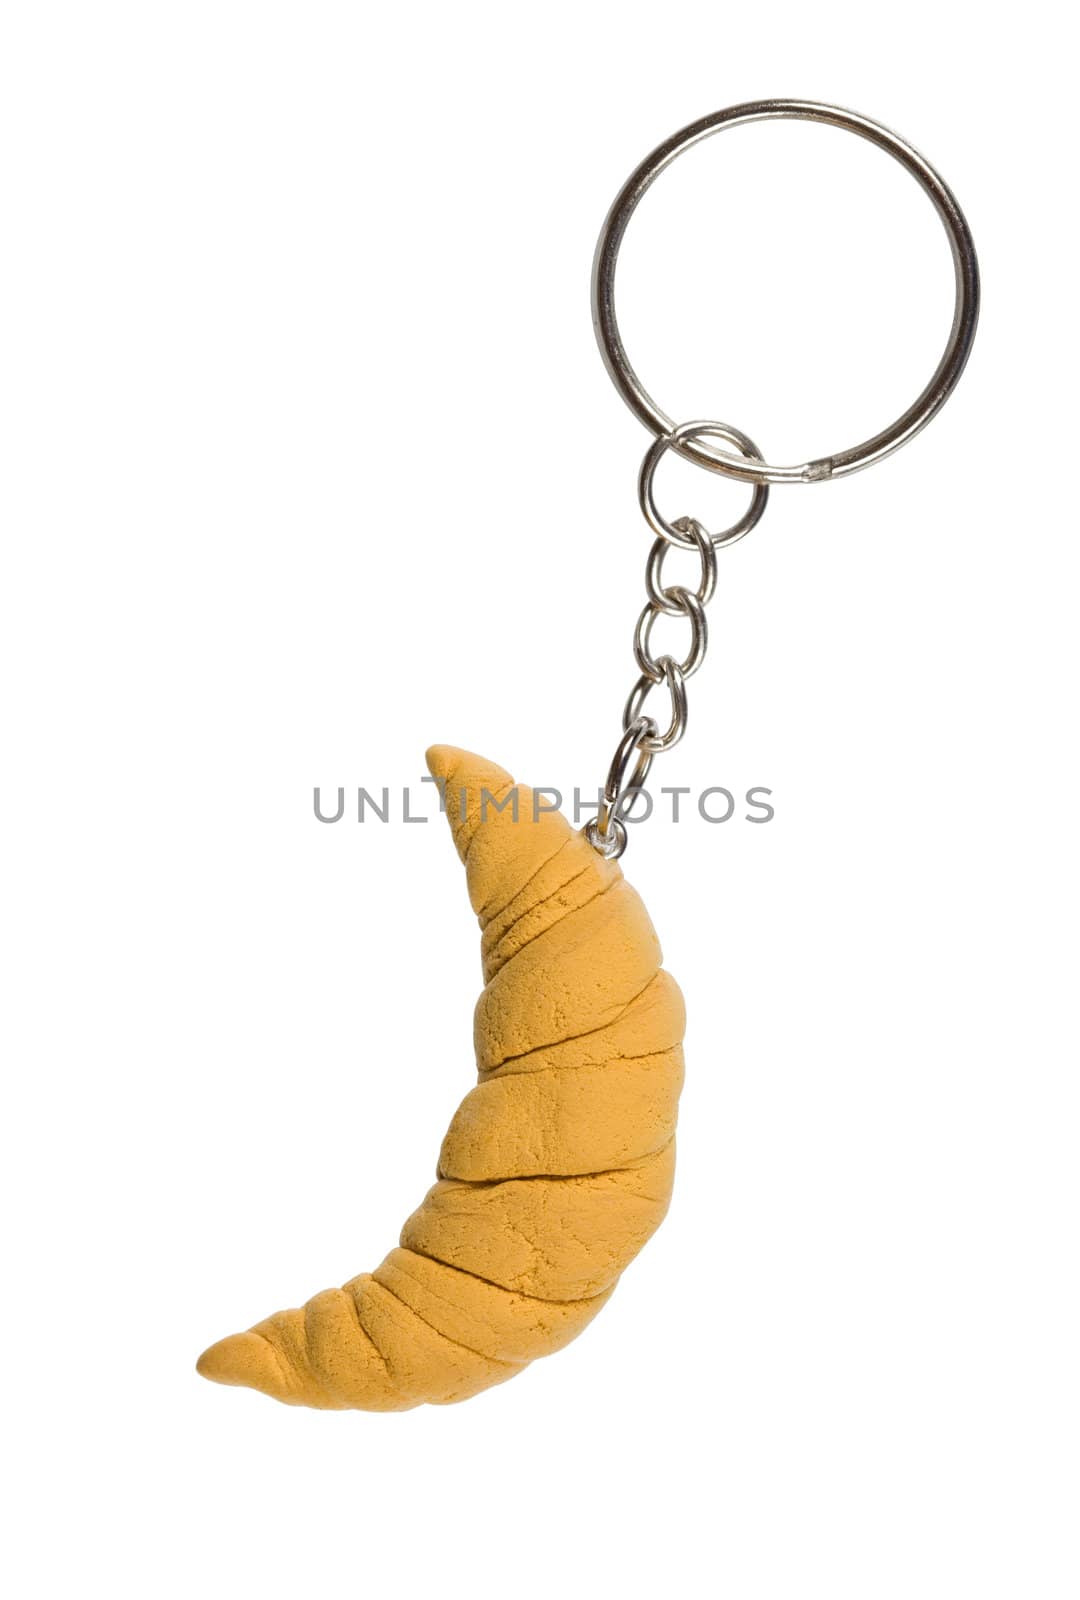 Charm as a croissant isolated on white background. Handmade.